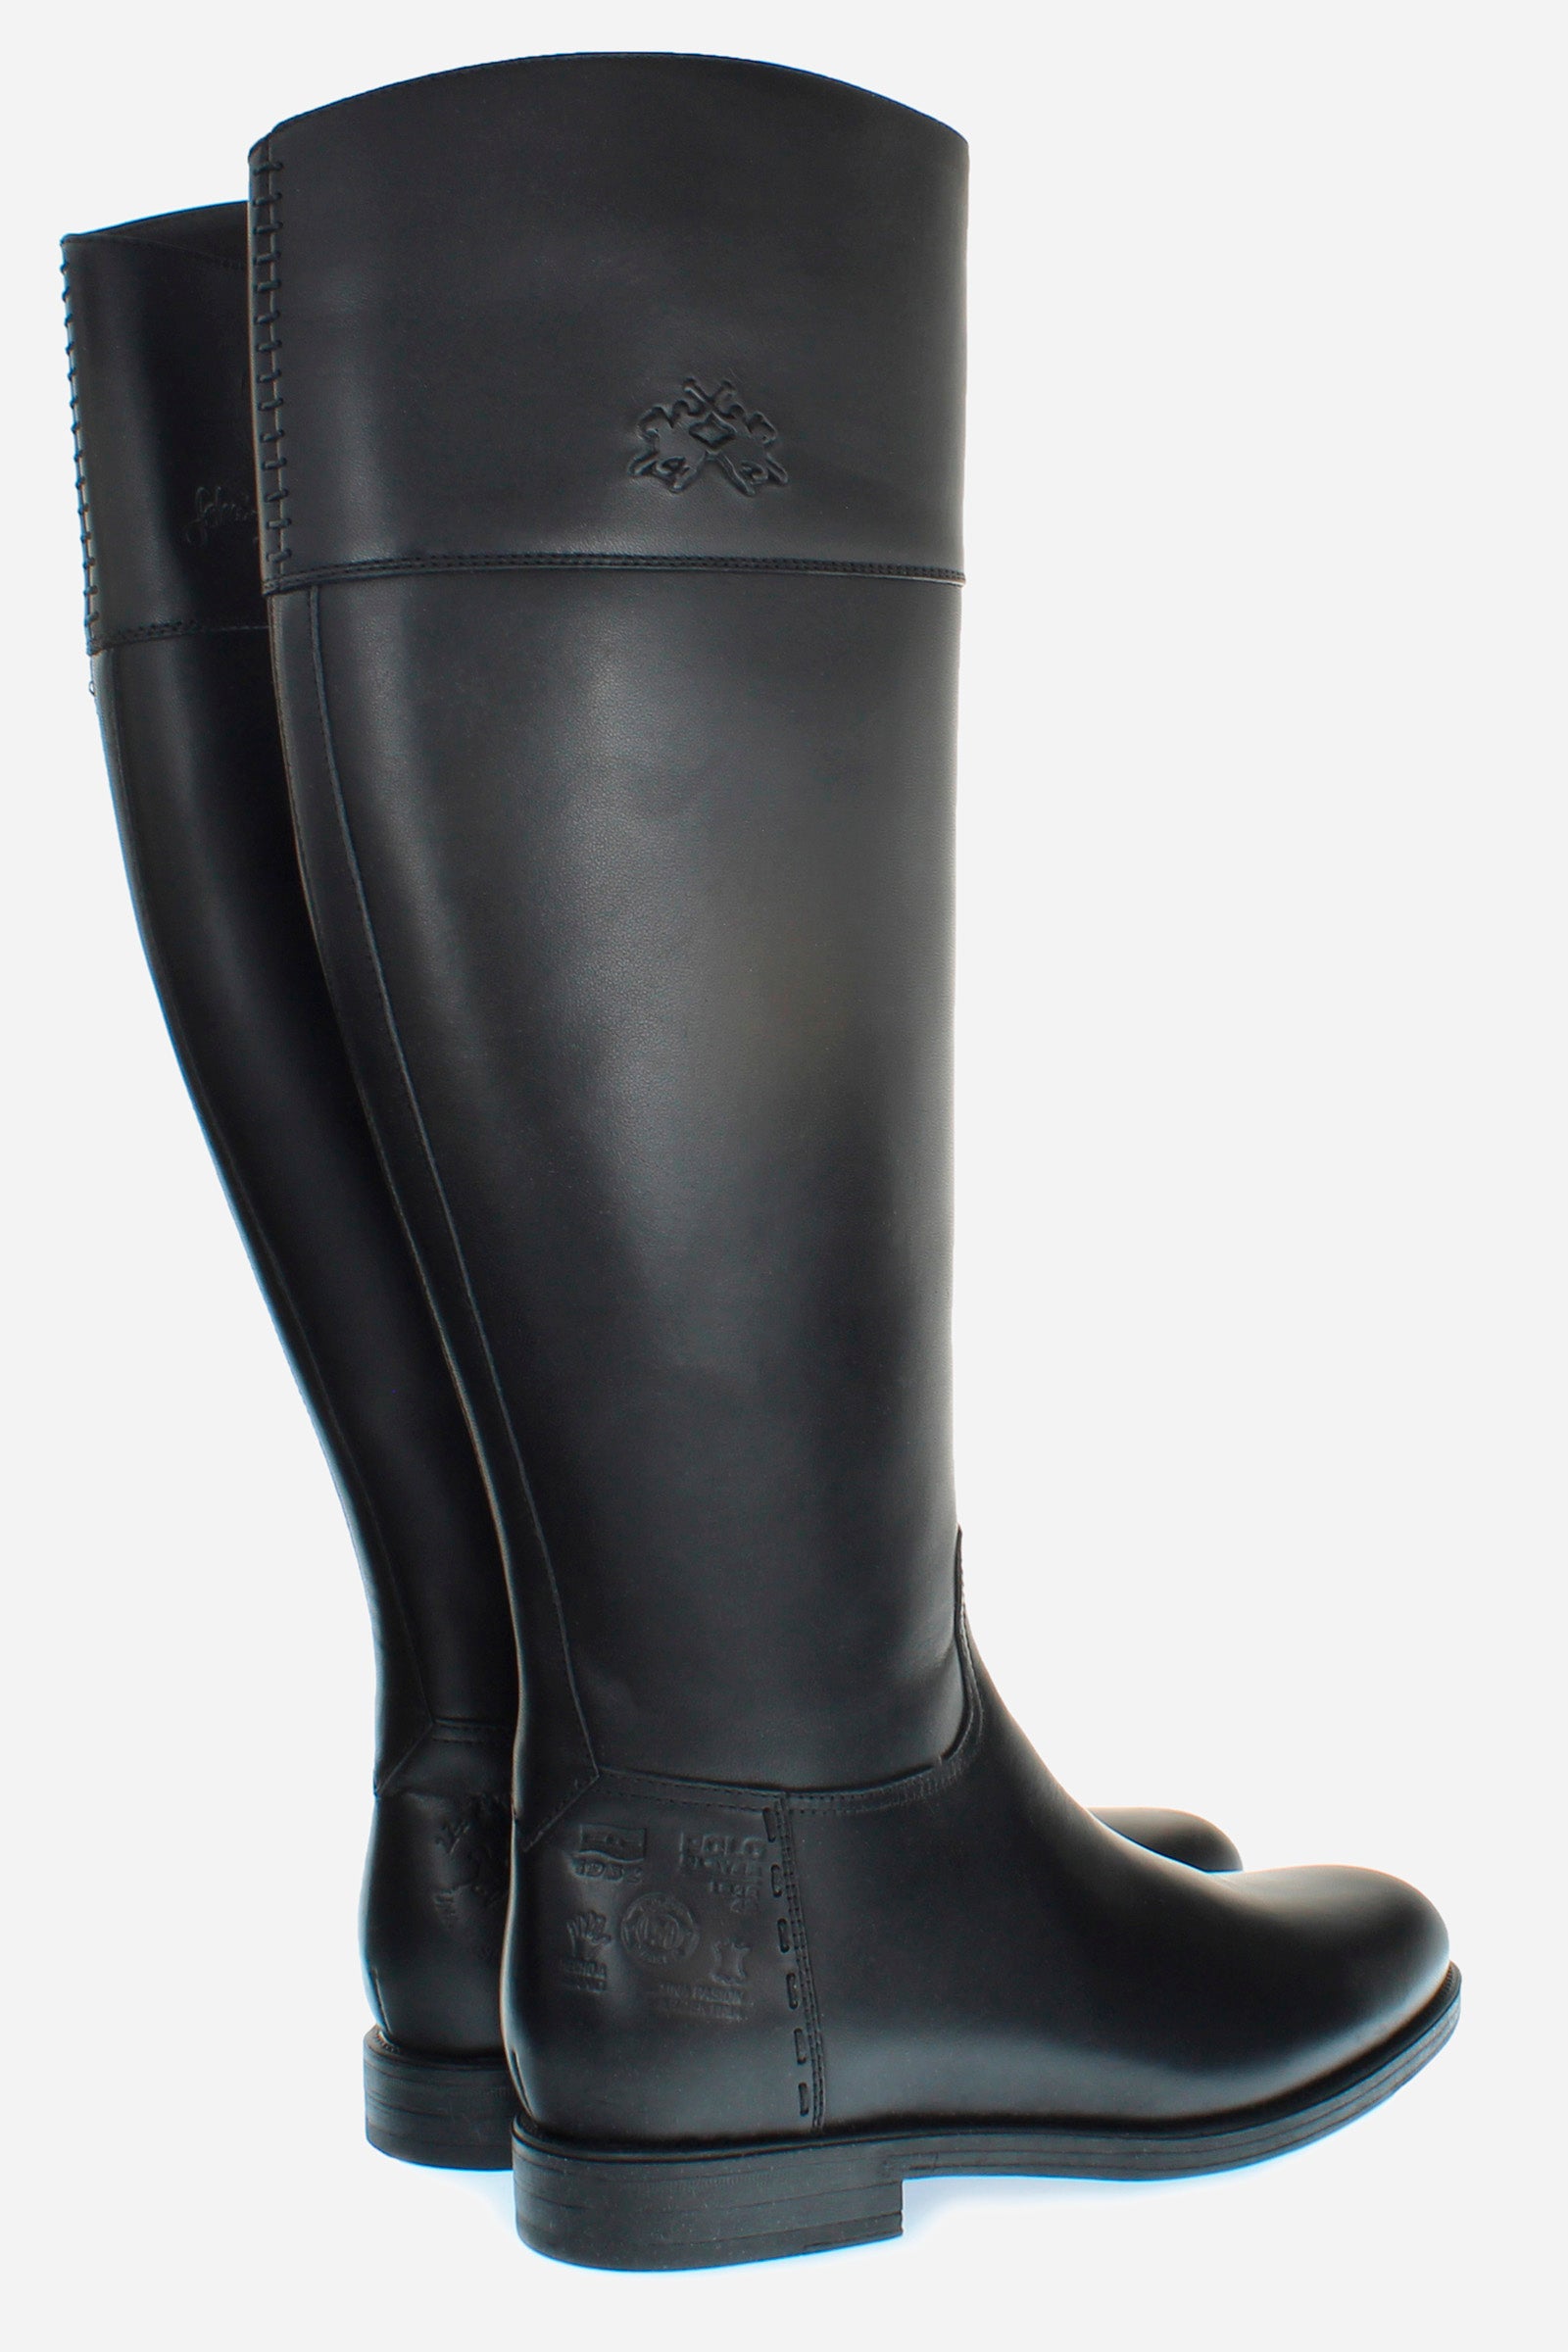 Women’s equestrian style leather boot